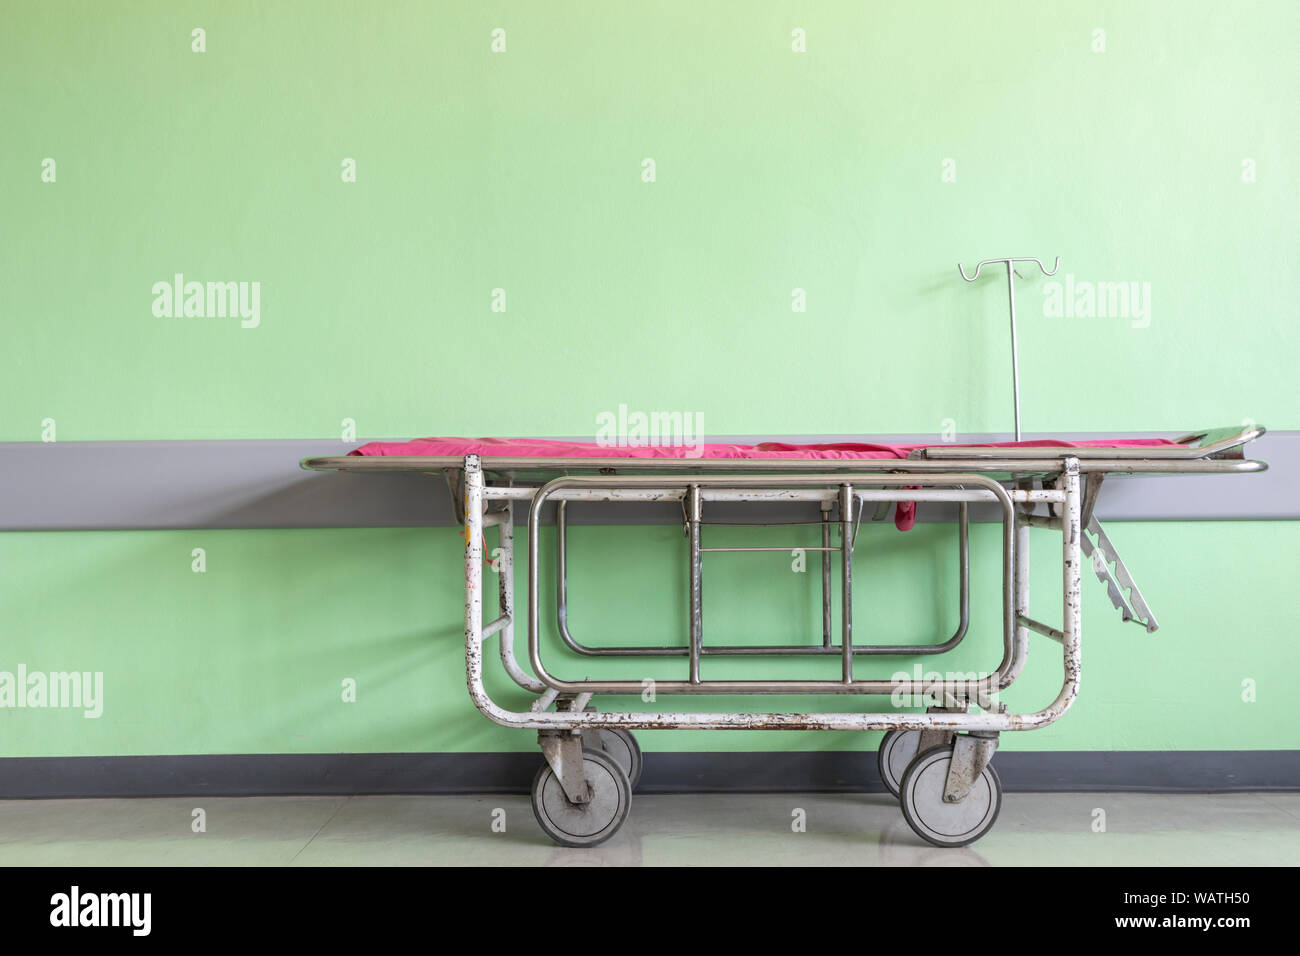 Empty patient stretchers and Gurneys beds on the side of the wall in hospital. Stock Photo